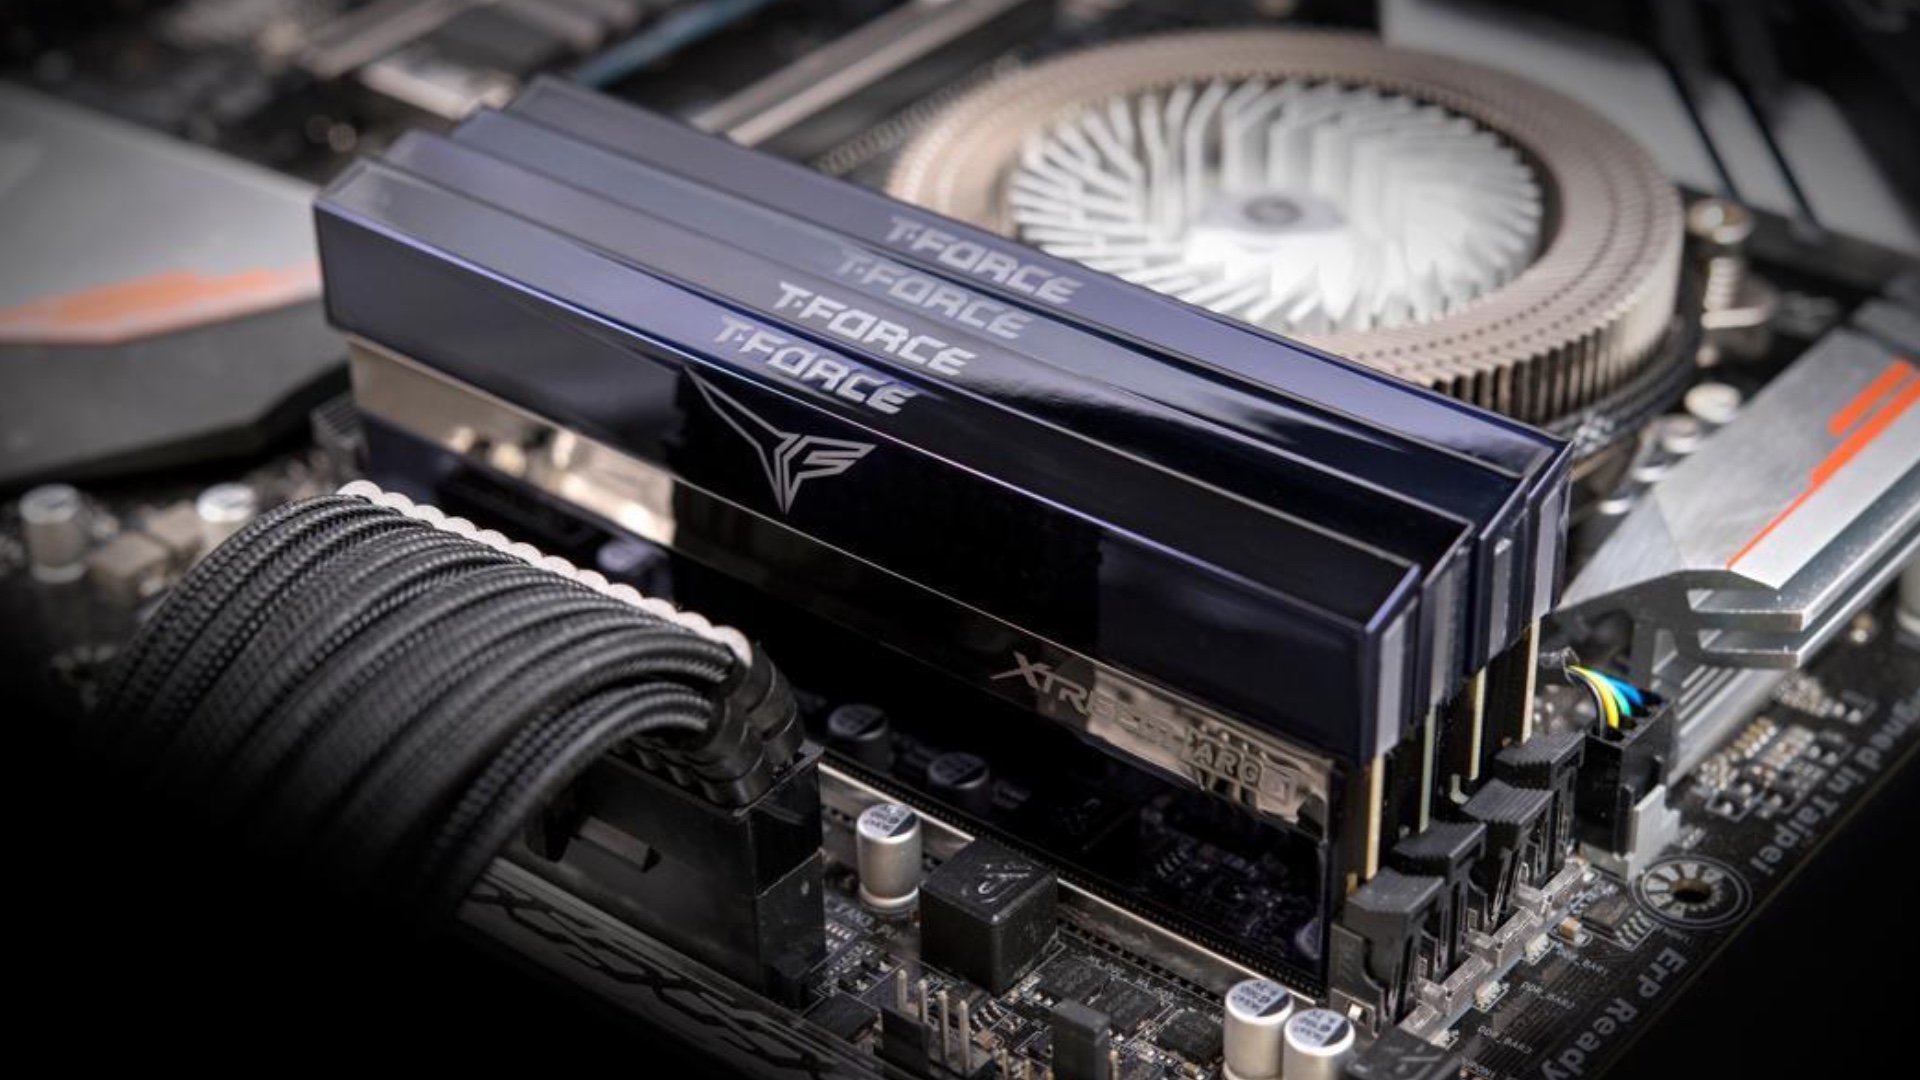 Never mind DDR5, Teamgroup’s new DDR4 RAM kit has a mammoth 256GB capacity